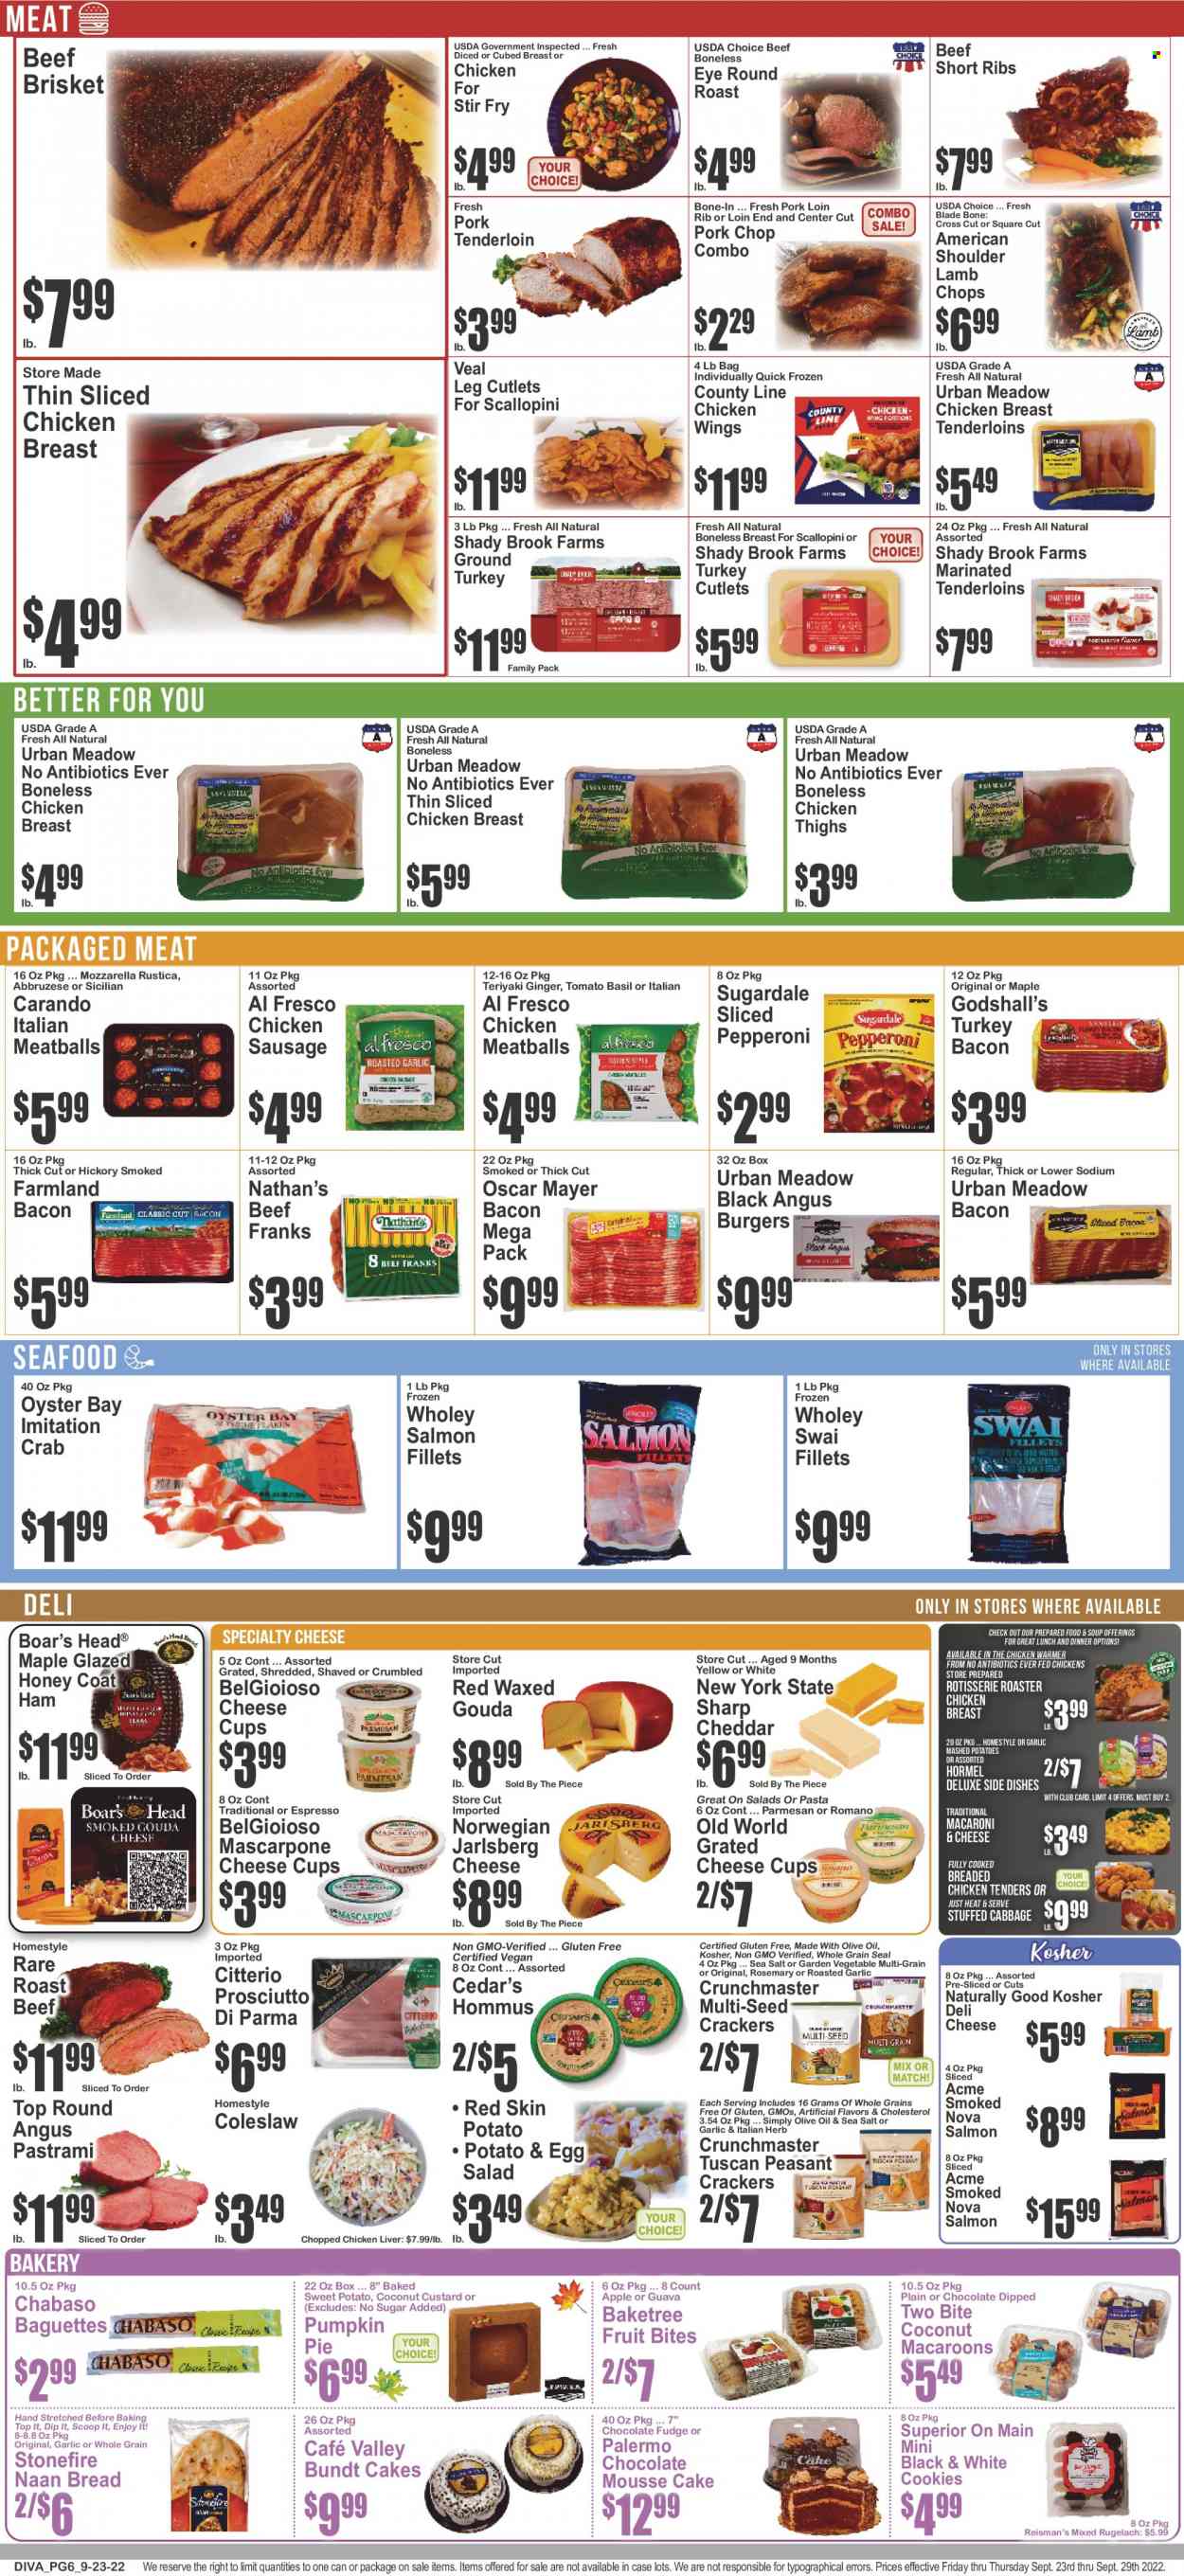 thumbnail - Key Food Flyer - 09/23/2022 - 09/29/2022 - Sales products - baguette, bread, cake, pie, bundt, ginger, sweet potato, pumpkin, salad, guava, salmon, salmon fillet, oysters, seafood, crab, swai fillet, coleslaw, macaroni & cheese, mashed potatoes, meatballs, soup, hamburger, fried chicken, Hormel, Sugardale, bacon, turkey bacon, ham, prosciutto, pastrami, Oscar Mayer, sausage, pepperoni, chicken sausage, hummus, gouda, mascarpone, cheese cup, parmesan, grated cheese, custard, eggs, dip, chicken wings, cookies, fudge, chocolate, crackers, rosemary, herbs, oil, ground turkey, chicken thighs, beef meat, beef ribs, round roast, roast beef, beef brisket, pork chops, pork loin, pork meat, pork tenderloin, lamb chops, lamb meat, cup. Page 7.